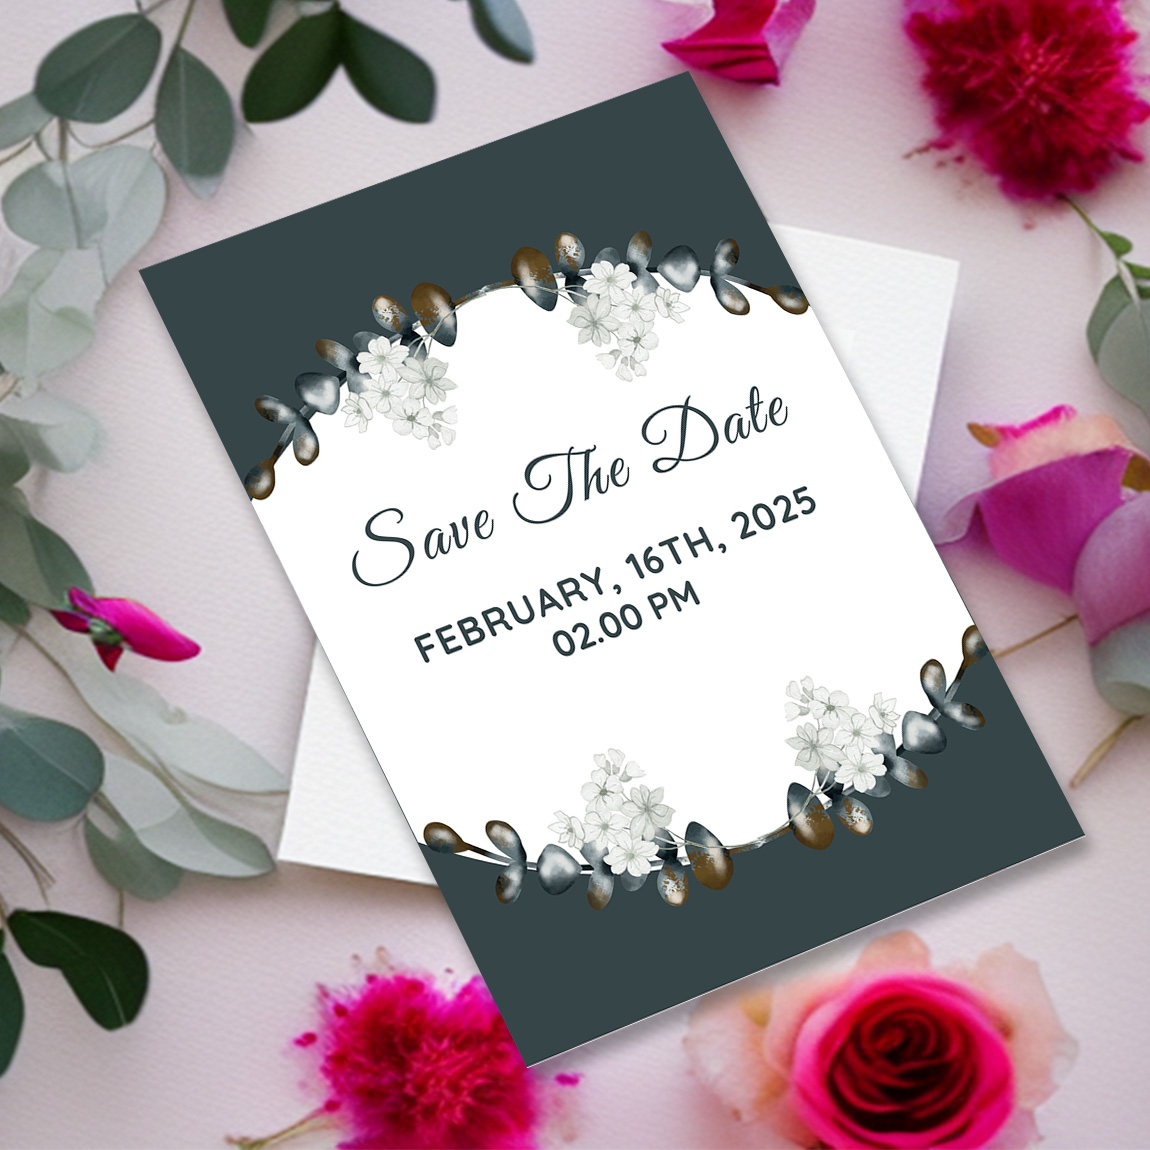 Image with charming wedding invitation card in dark green color and flowers.